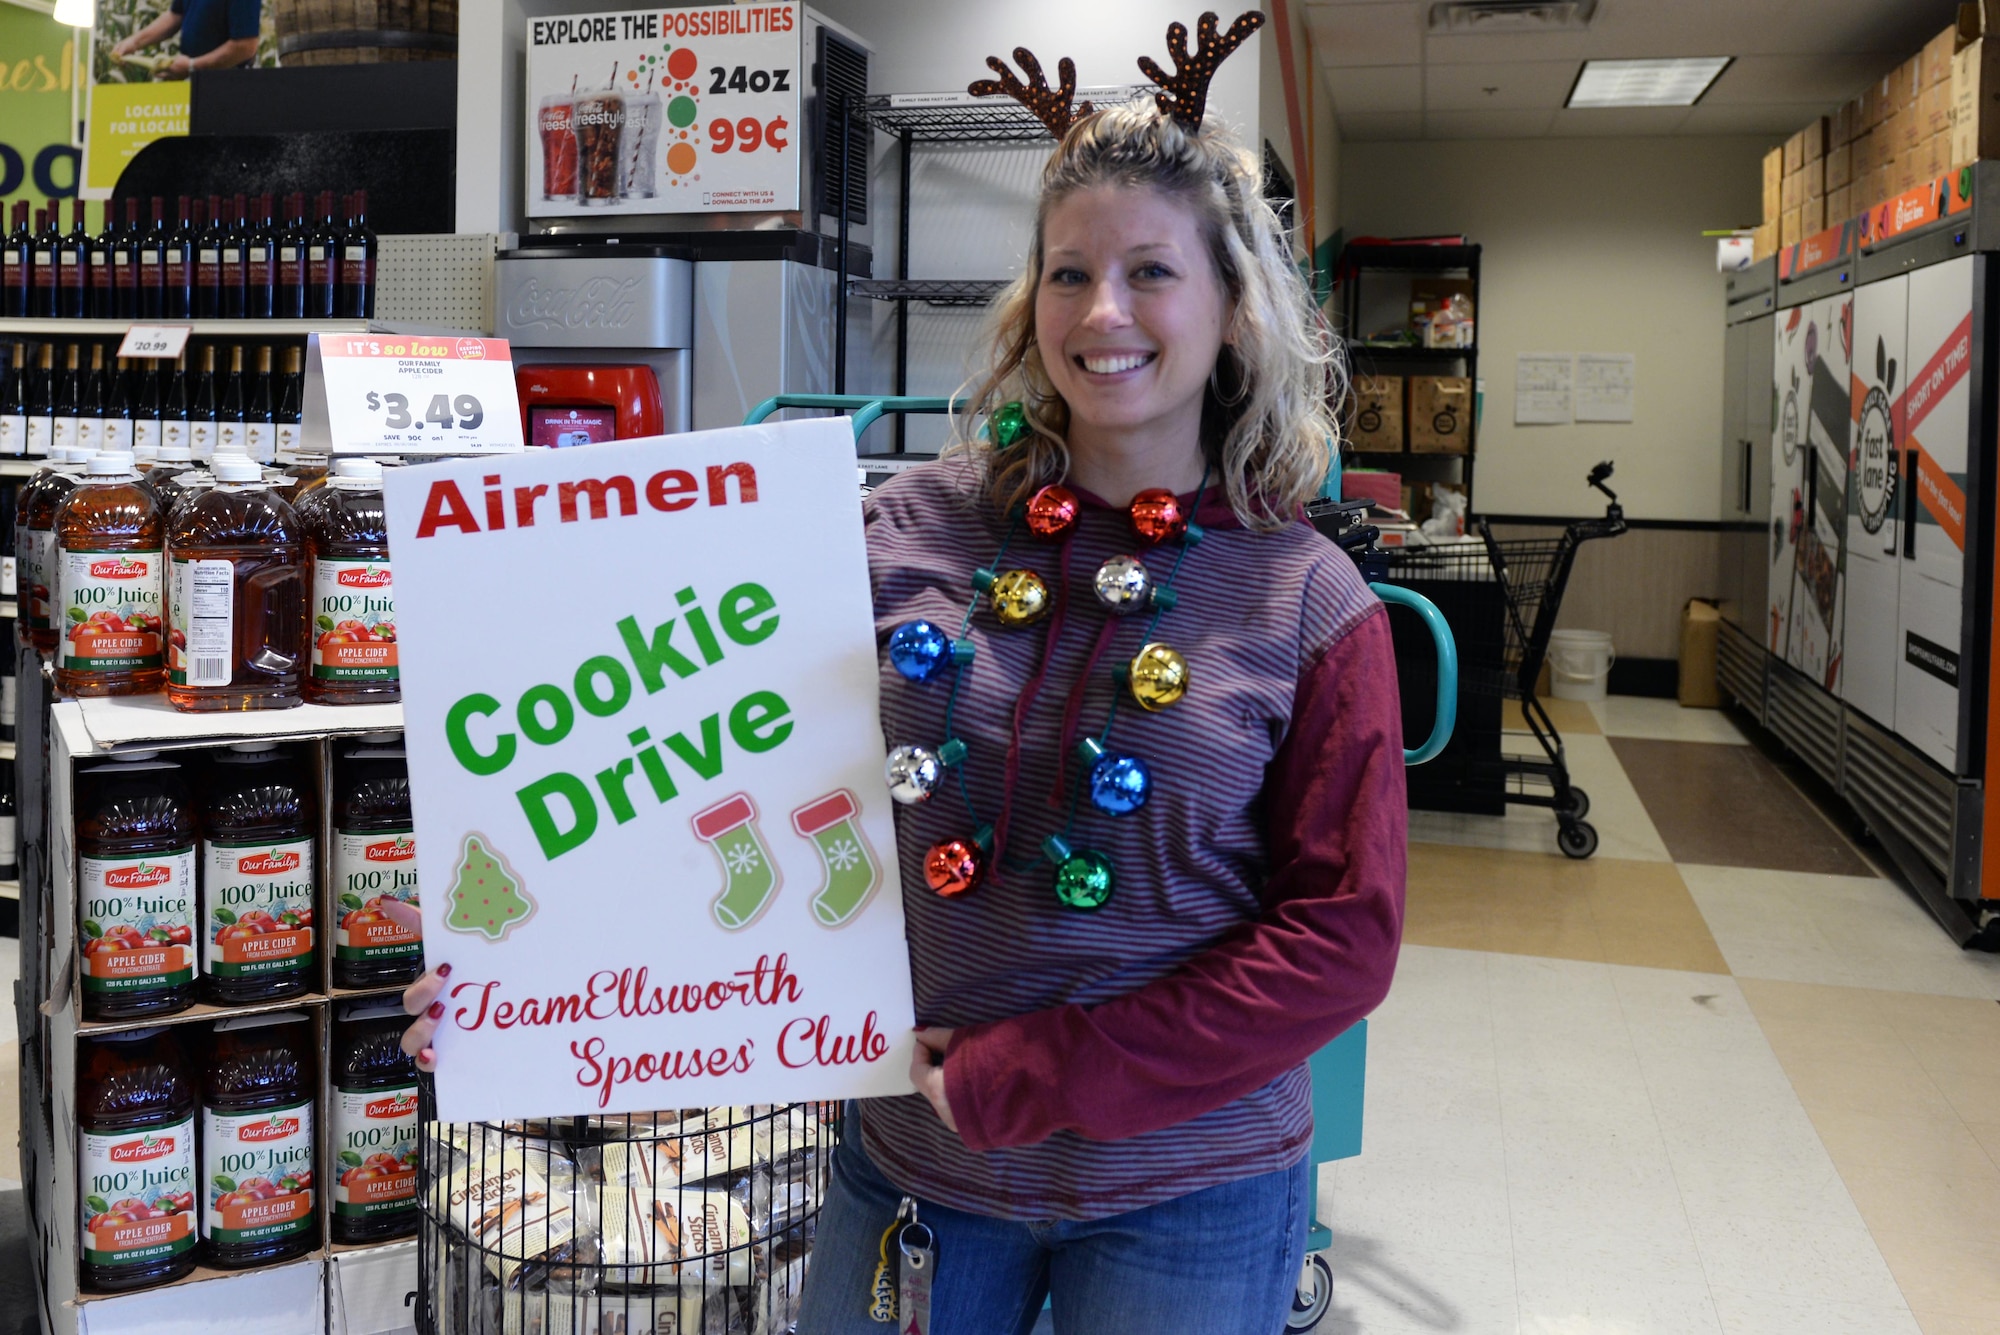 Heather Ryan, the Ellsworth Spouse’s Club Fundraising chairperson, holds a Cookie Drive for dormitory Airmen assigned to Ellsworth Air Force Base, S.D., at the Family Fare Super Market by Baken Park in Rapid City, Dec. 7, 2019. The purpose of the Cookie Drive is to distribute holiday cheer to single Airmen who are away from their families during the holidays. (U.S. Air Force photo by Airman Quentin K. Marx)